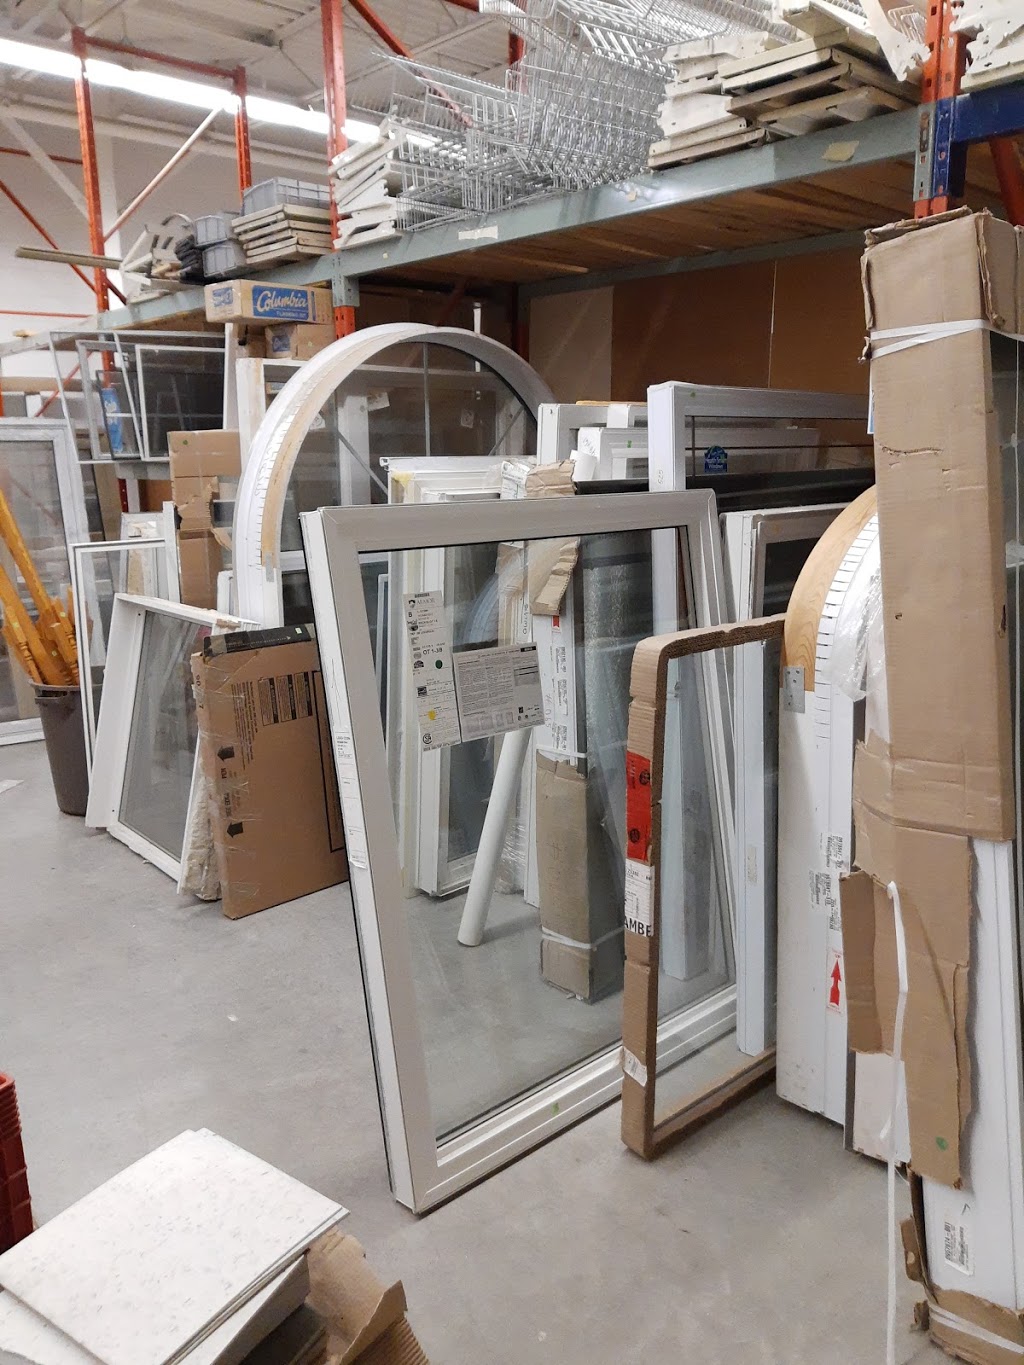 Habitat For Humanity ReStore | hardware store | 128 Brock St, Barrie, ON L4N 2M2, Canada | 8778352001 OR +1 877-835-2001